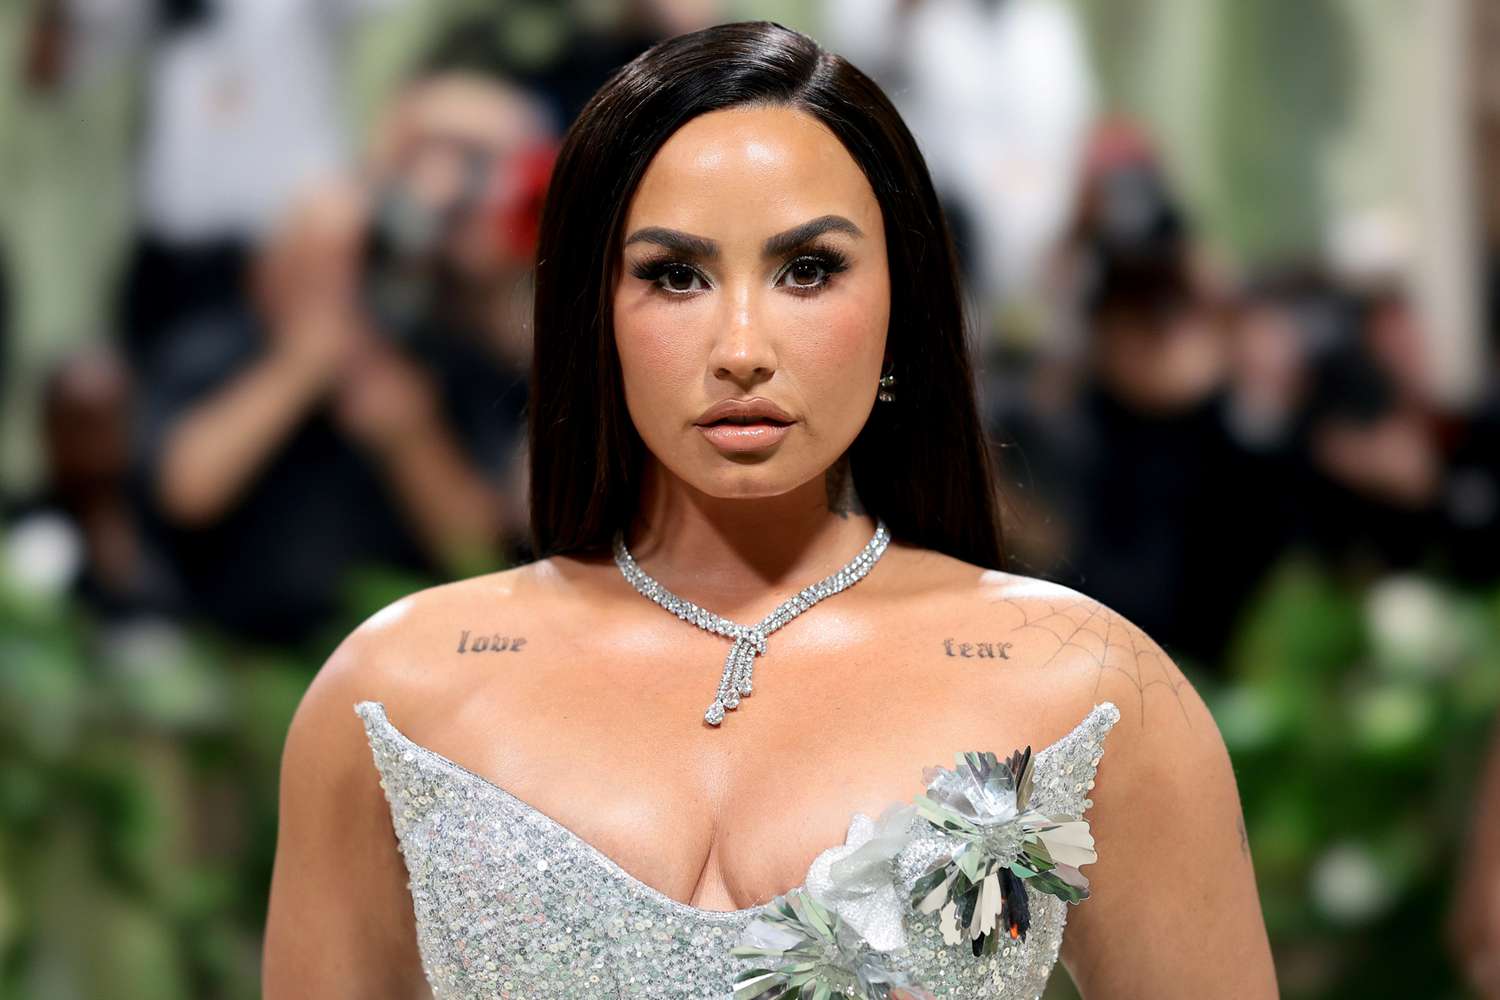 Demi Lovato Talks ‘Hope’ After Five In-Patient Mental Health Treatments [Video]